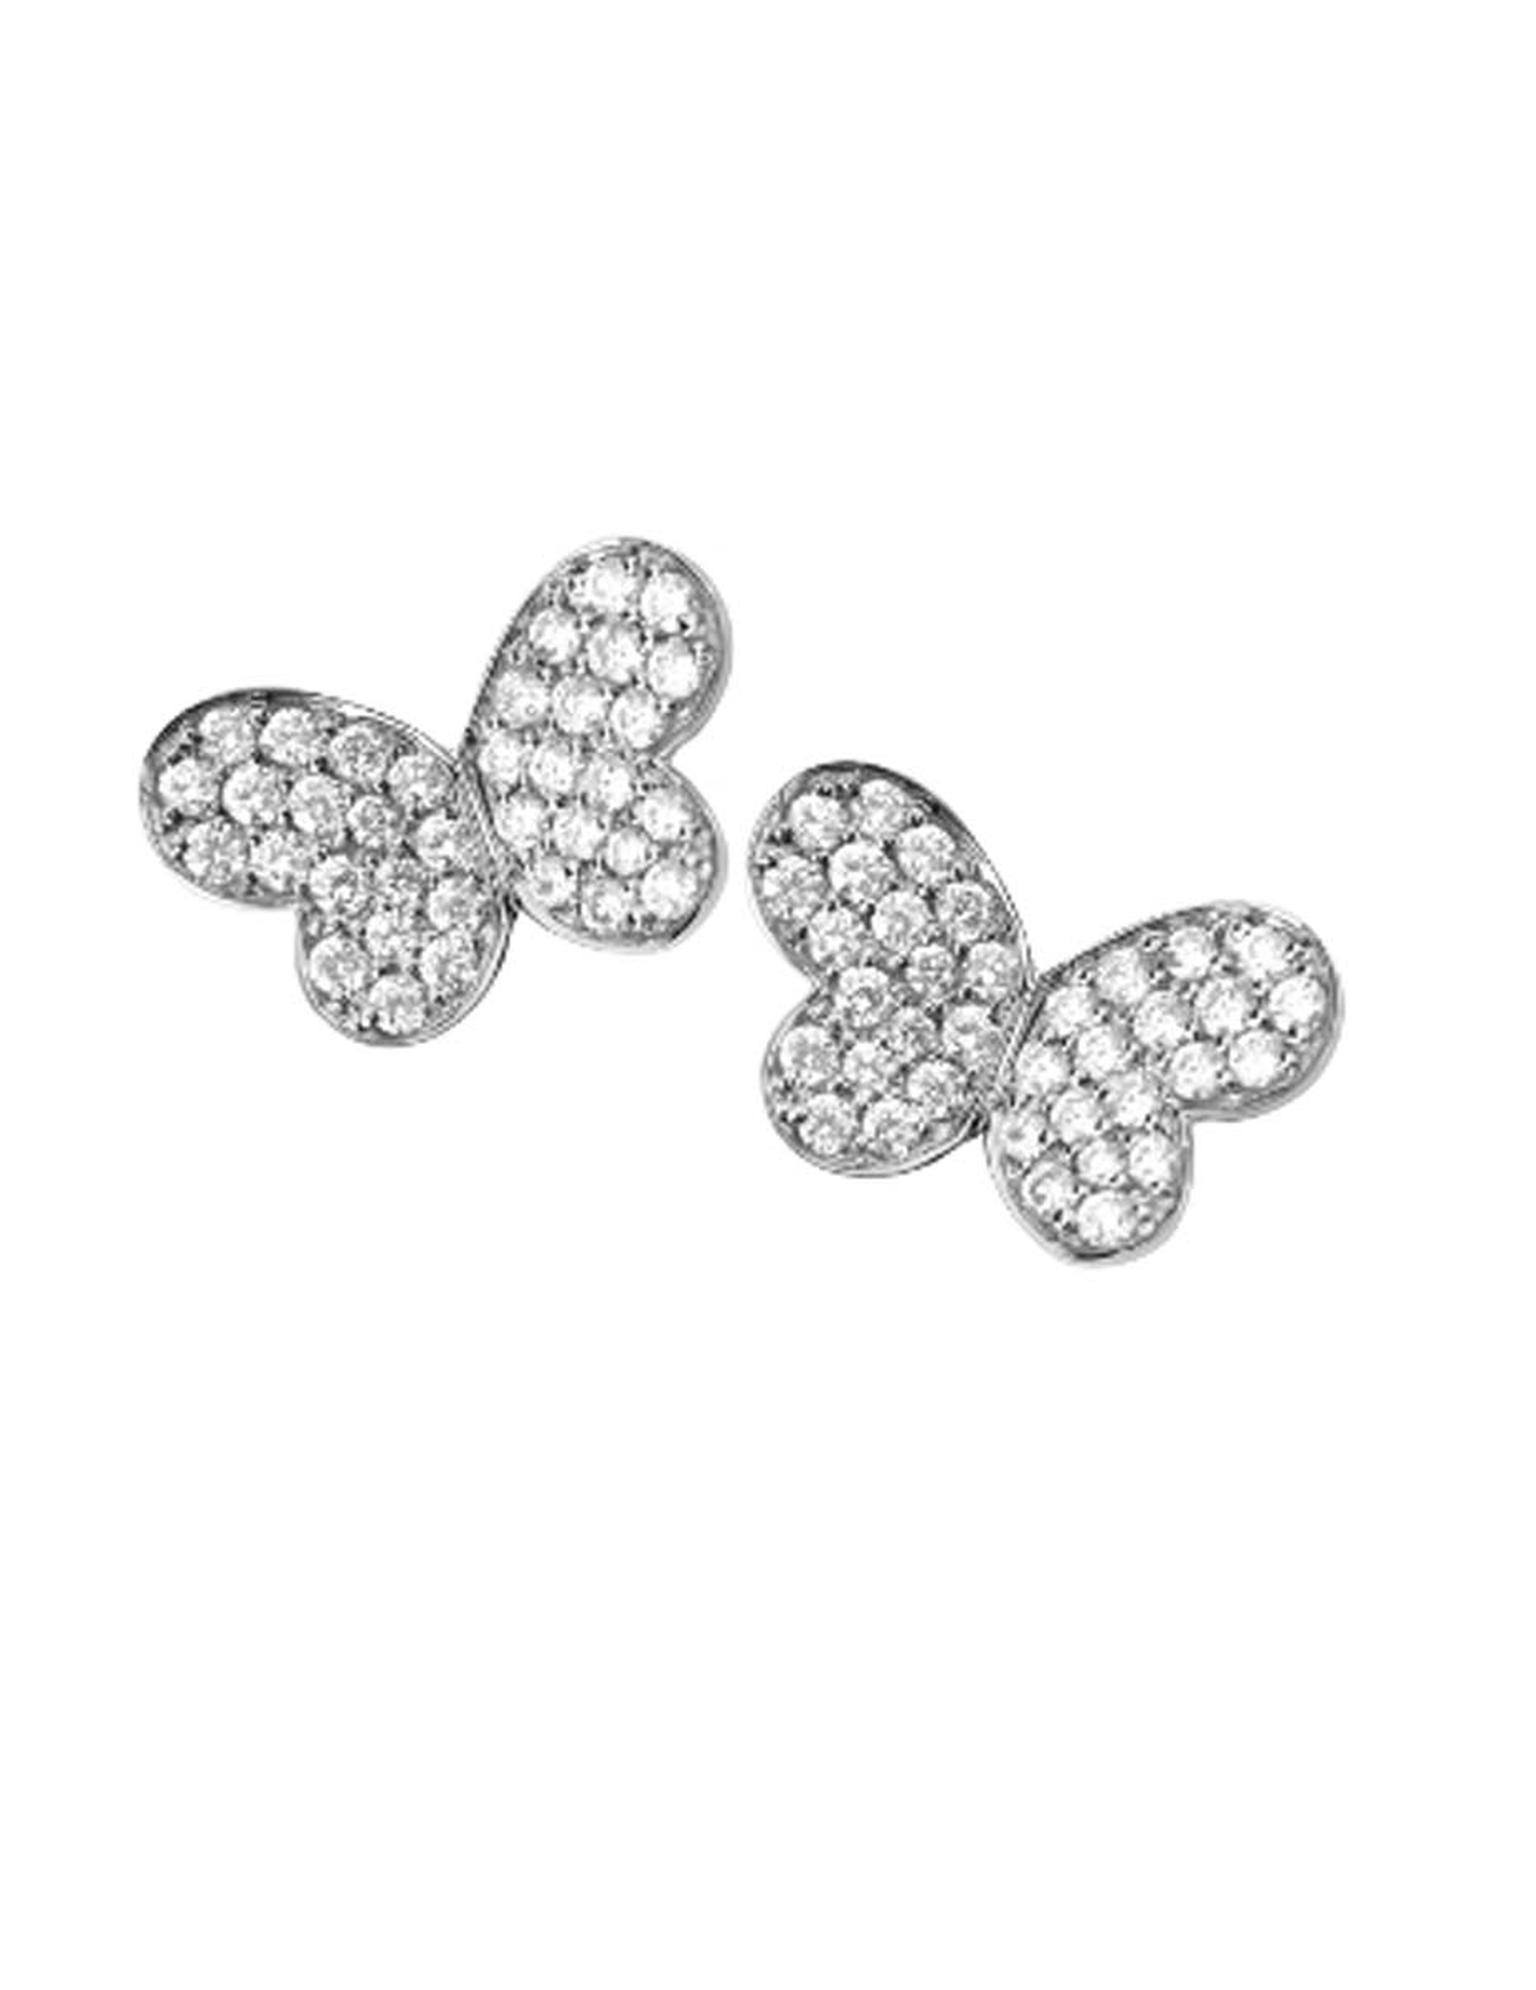 Elena Carrera diamond Butterfly earrings from the Mariposas collection as worn by Queen Letizia.